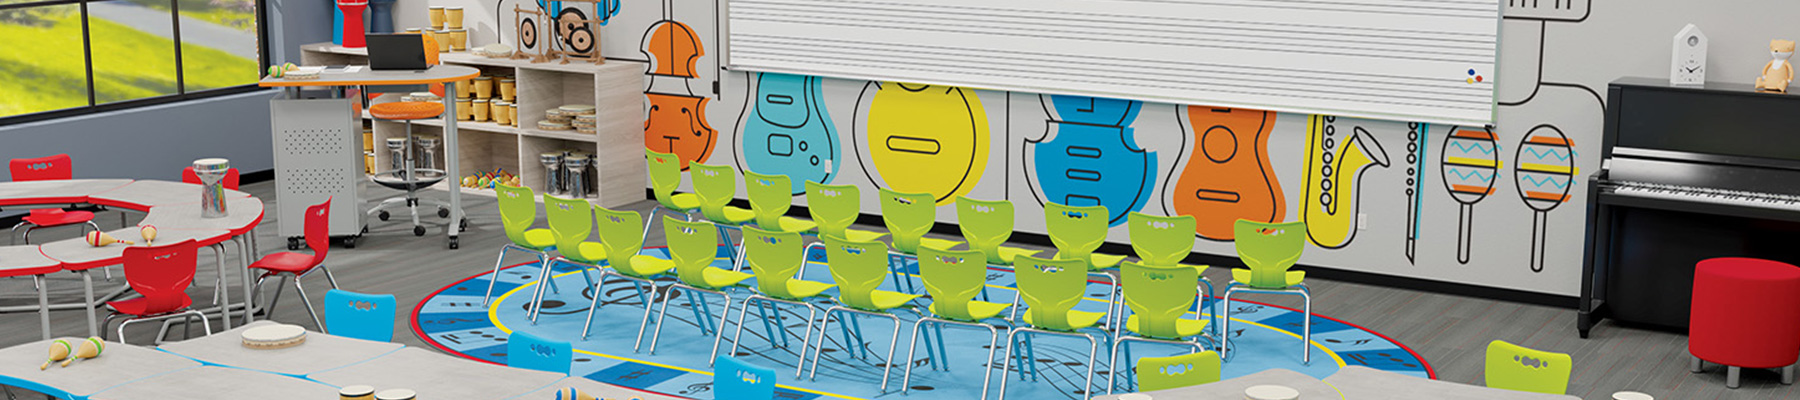 classroom and school furniture